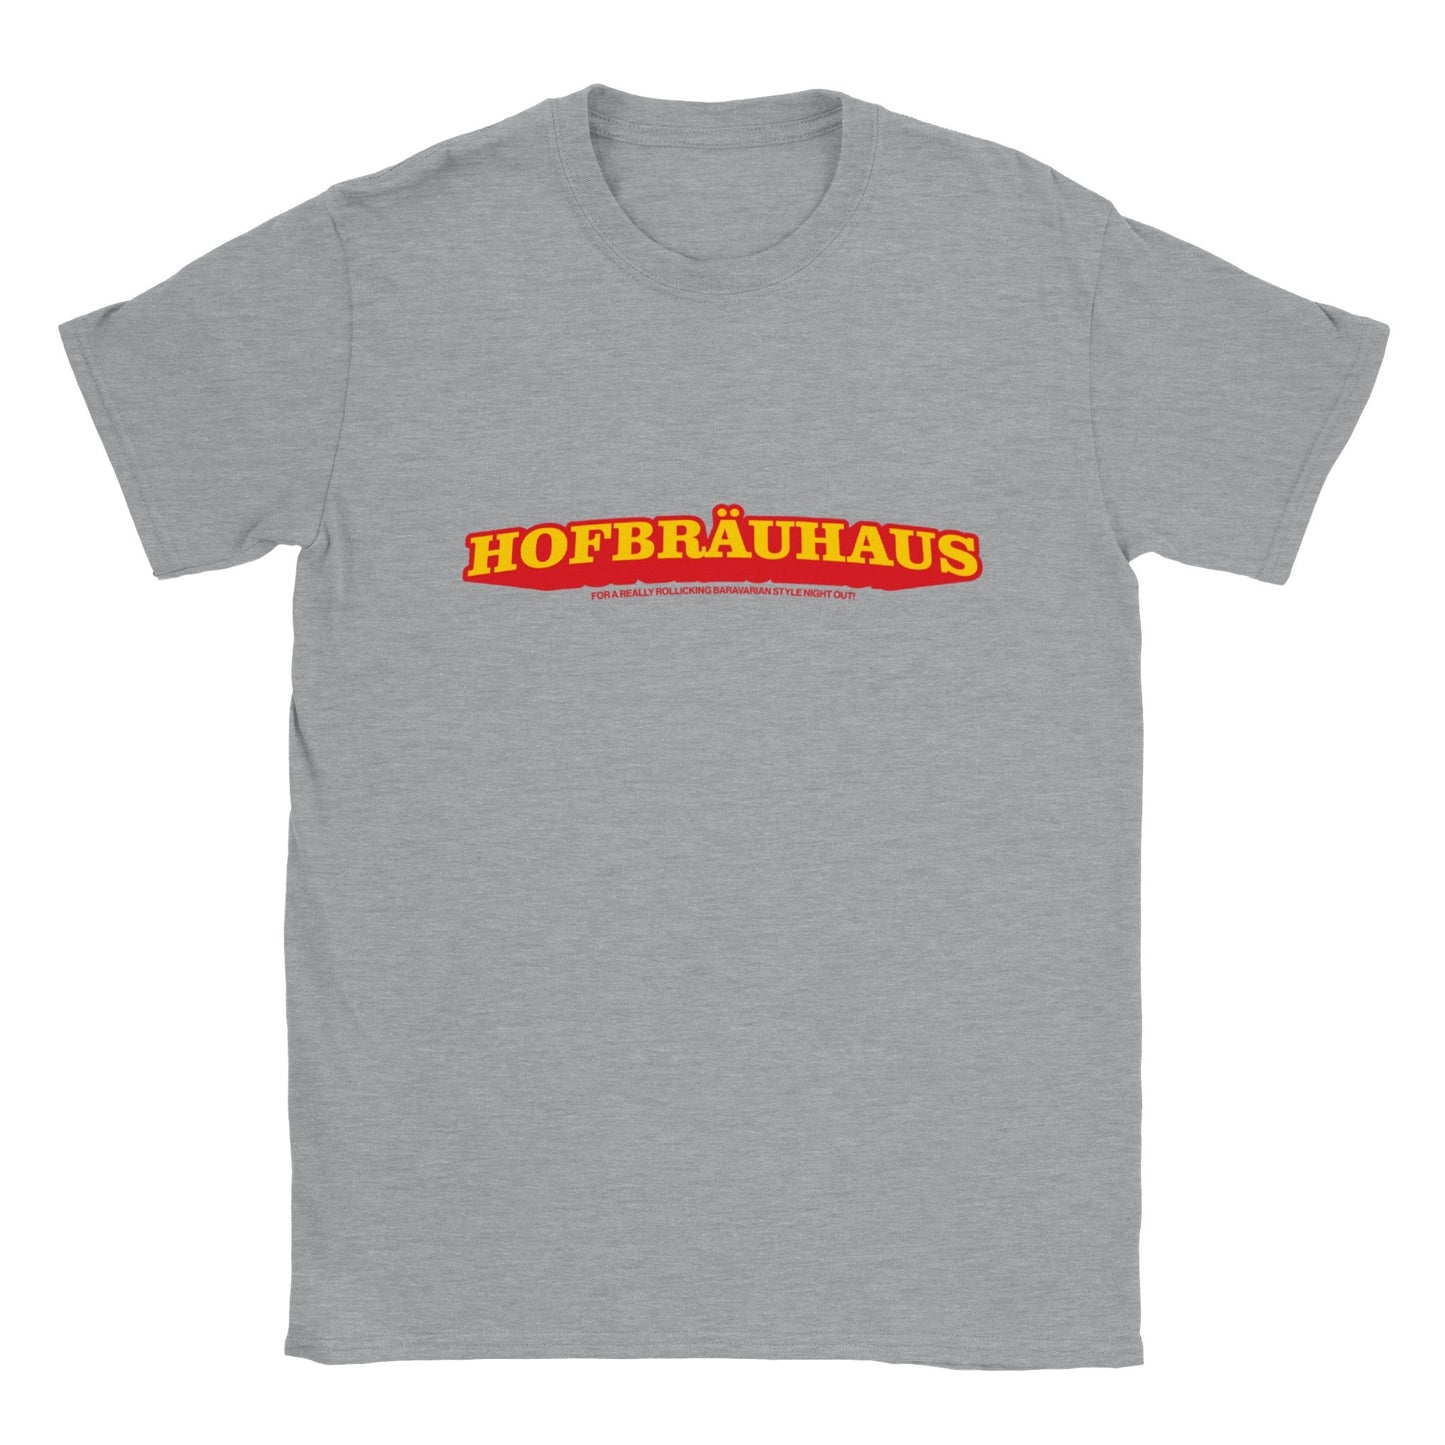 Hofbrauhaus - Liverpool - unisex fit T-shirt - various colours - Dirty Stop Outs